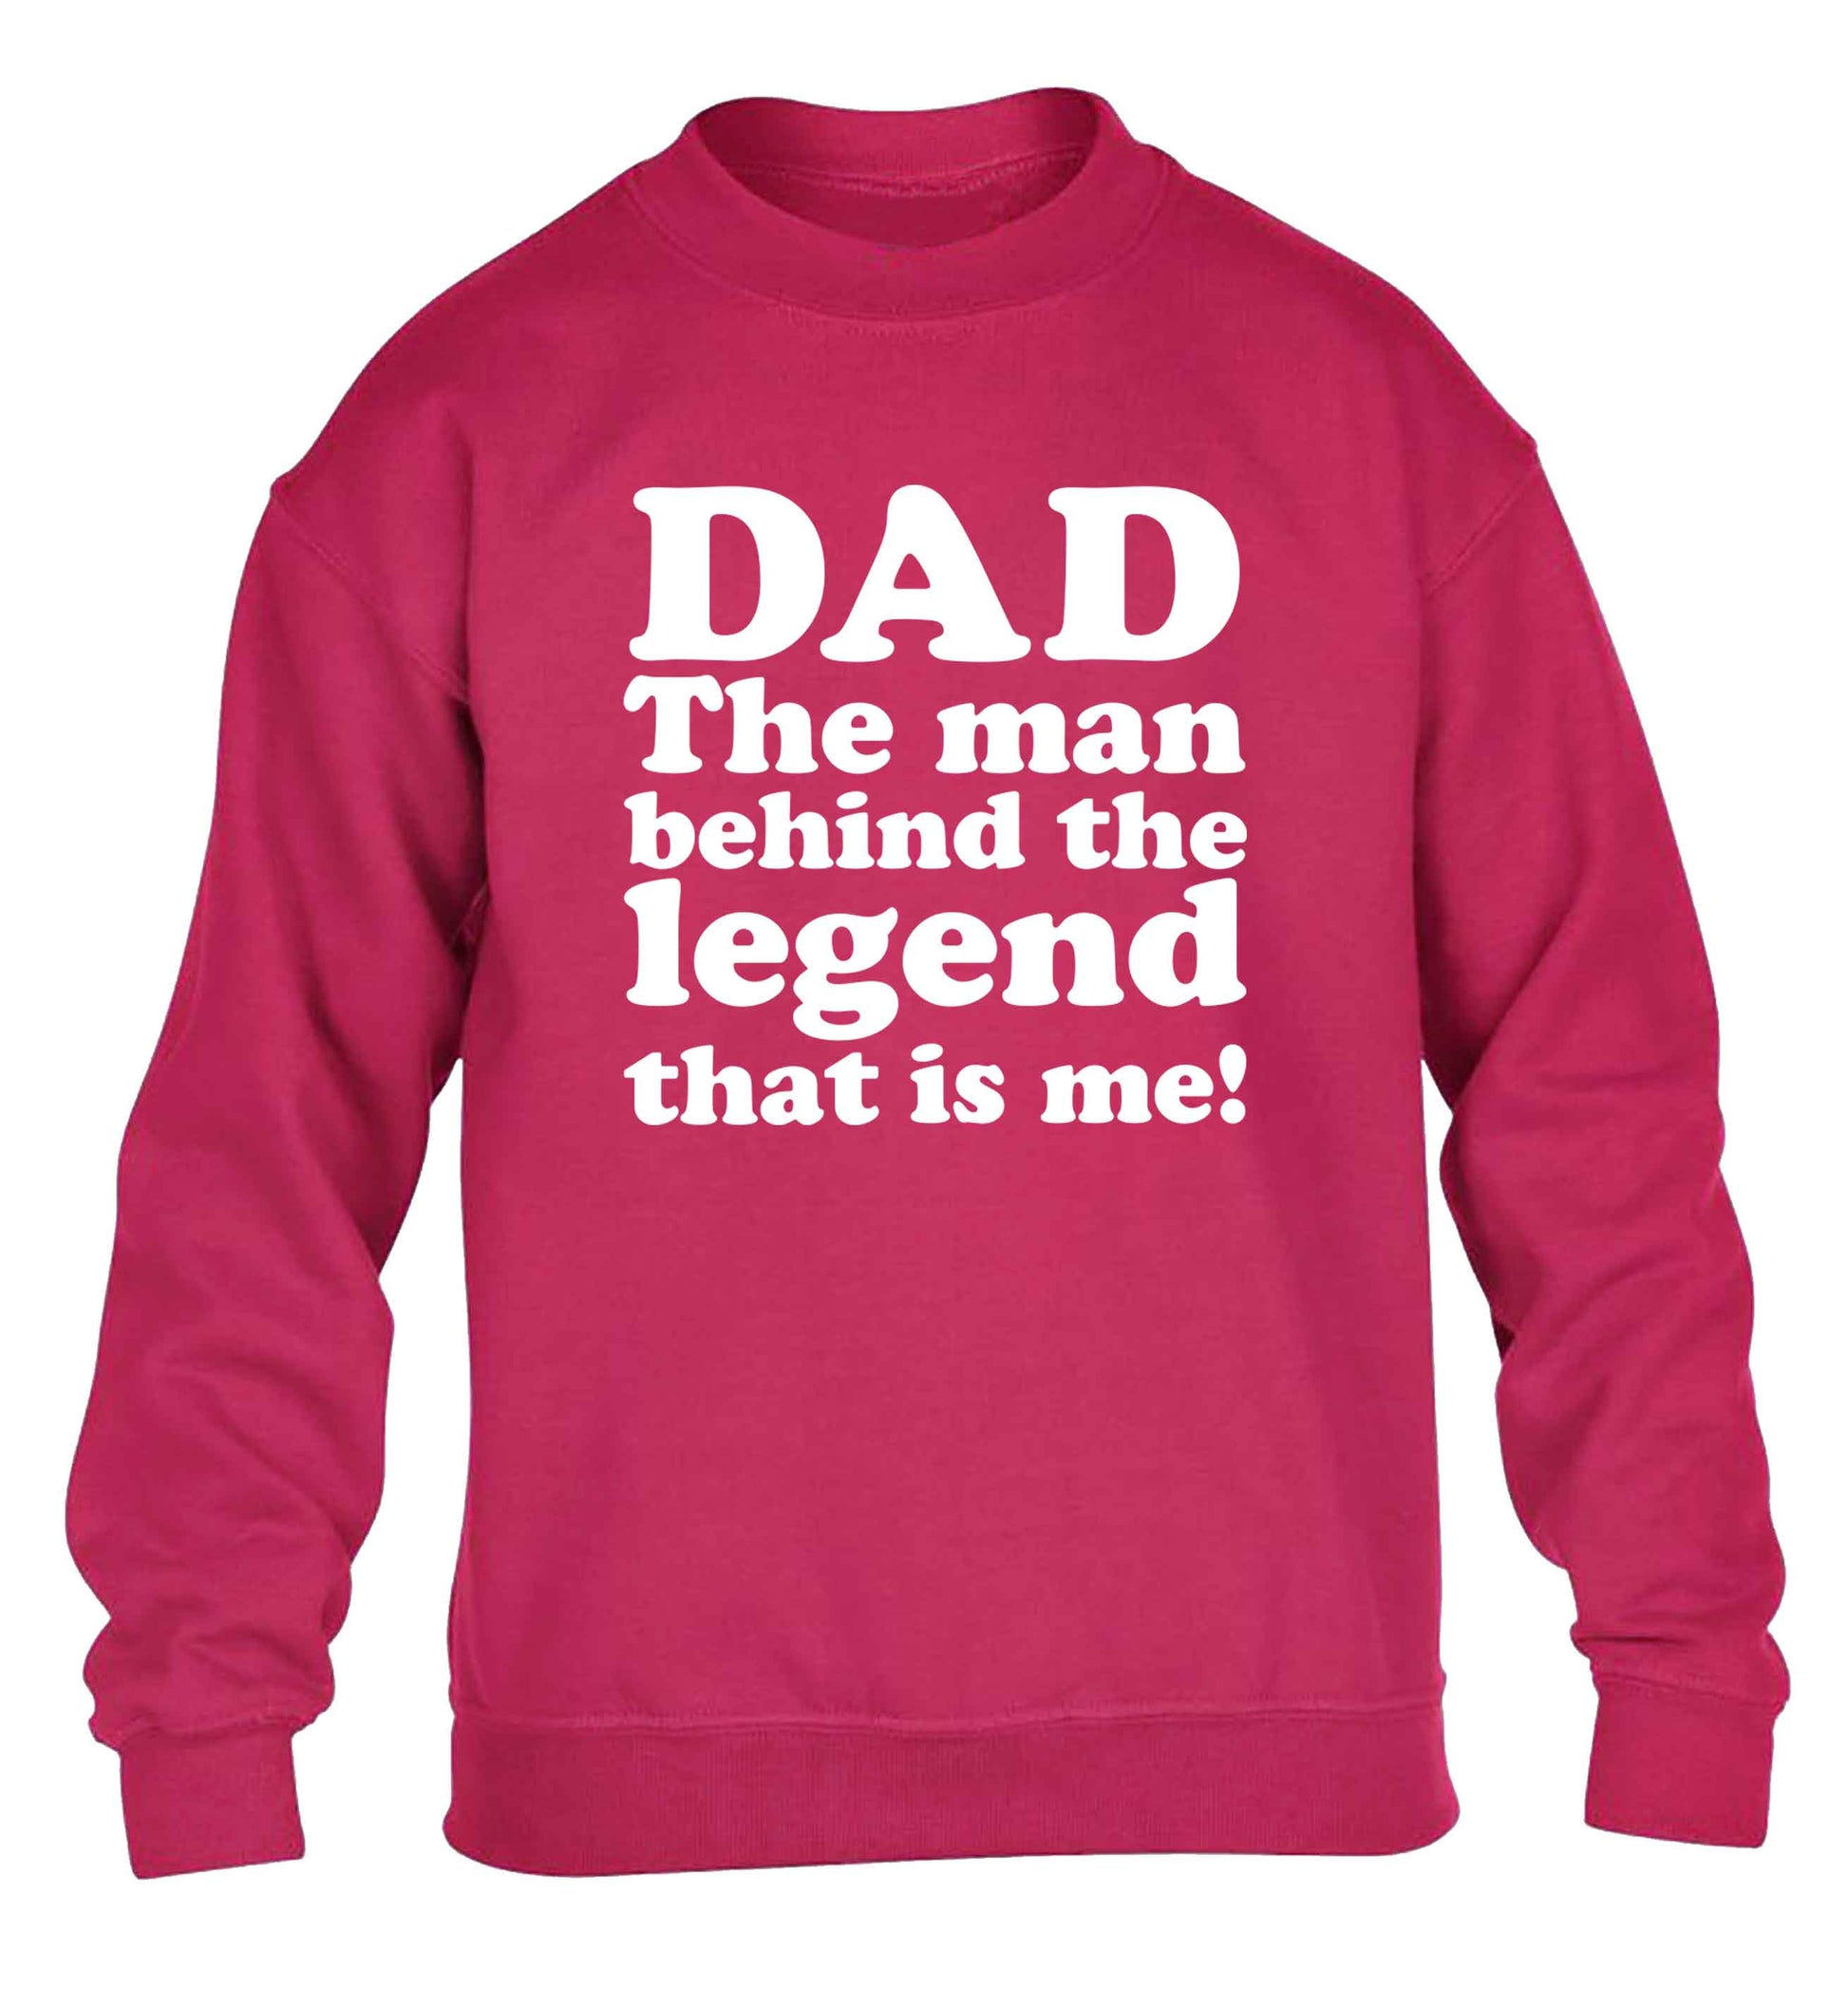 Dad the man behind the legend that is me children's pink sweater 12-13 Years